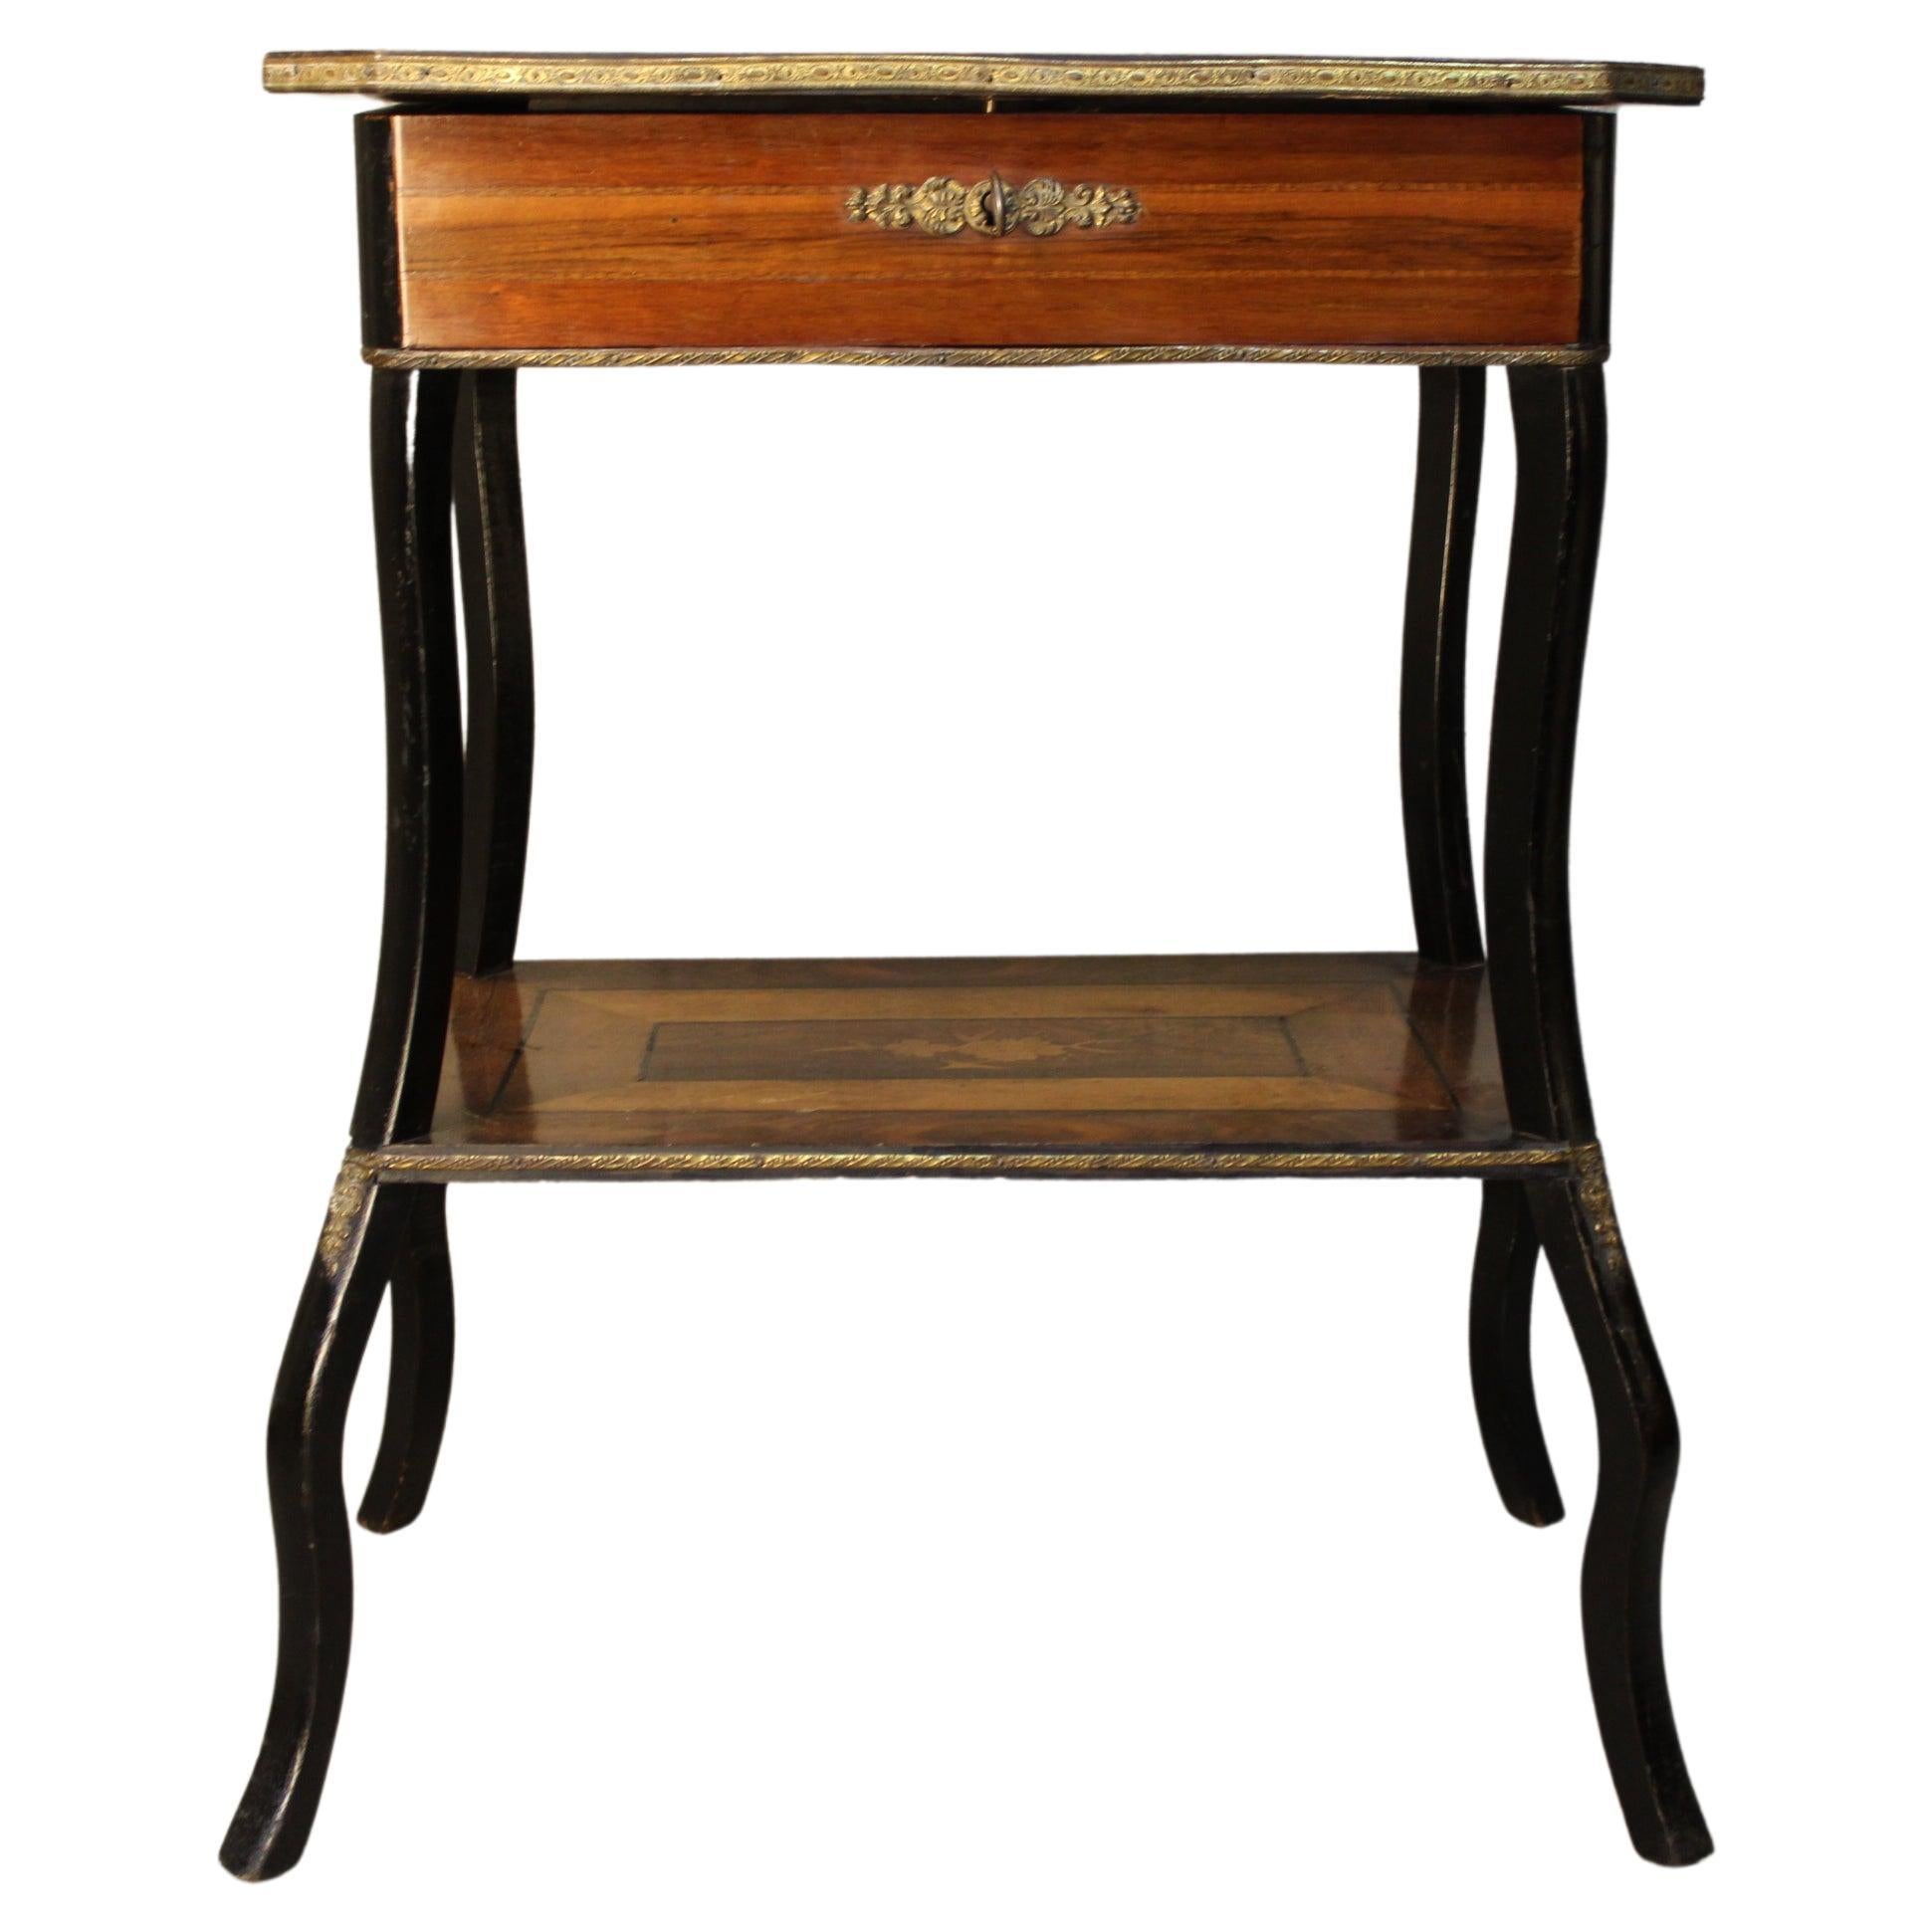 19th century marquetry side table Napoleon III circa 1860 France
ebonized legs and marquetry top with different kind of woods
will be shipped inside a wood box 
storage and container shipping is possible
 